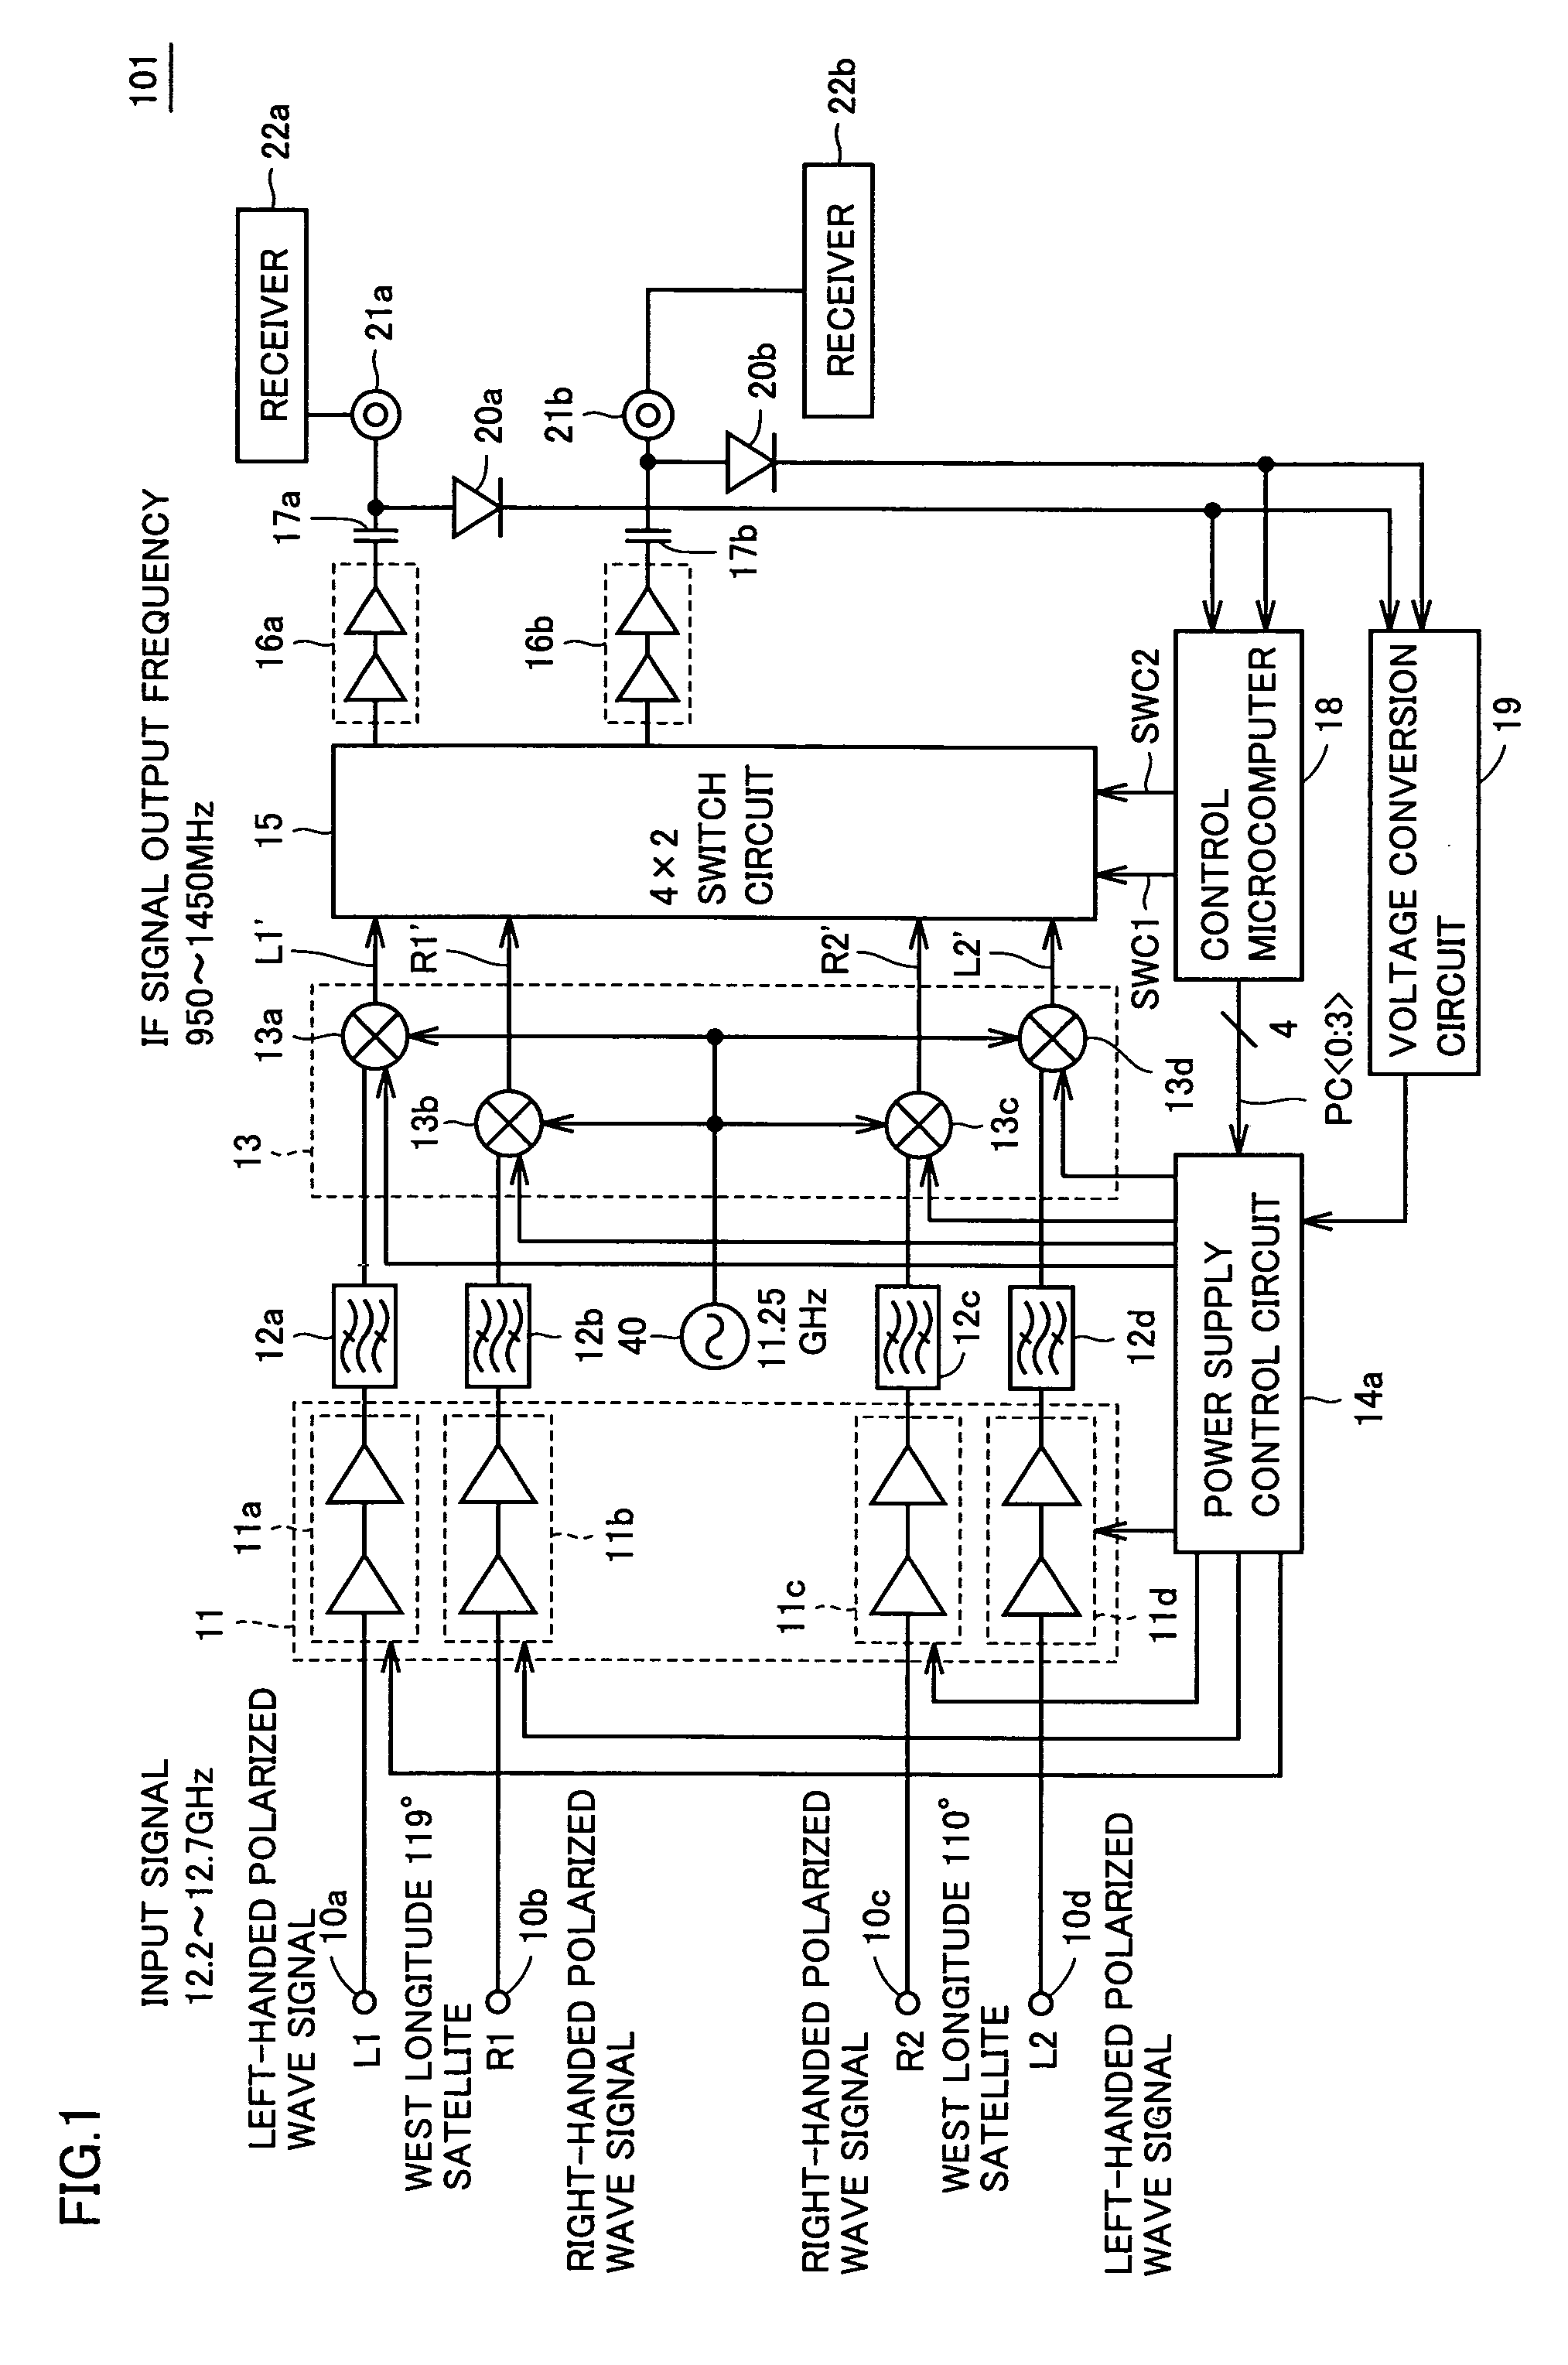 Satellite broadcast receiver apparatus intended to reduce power consumption